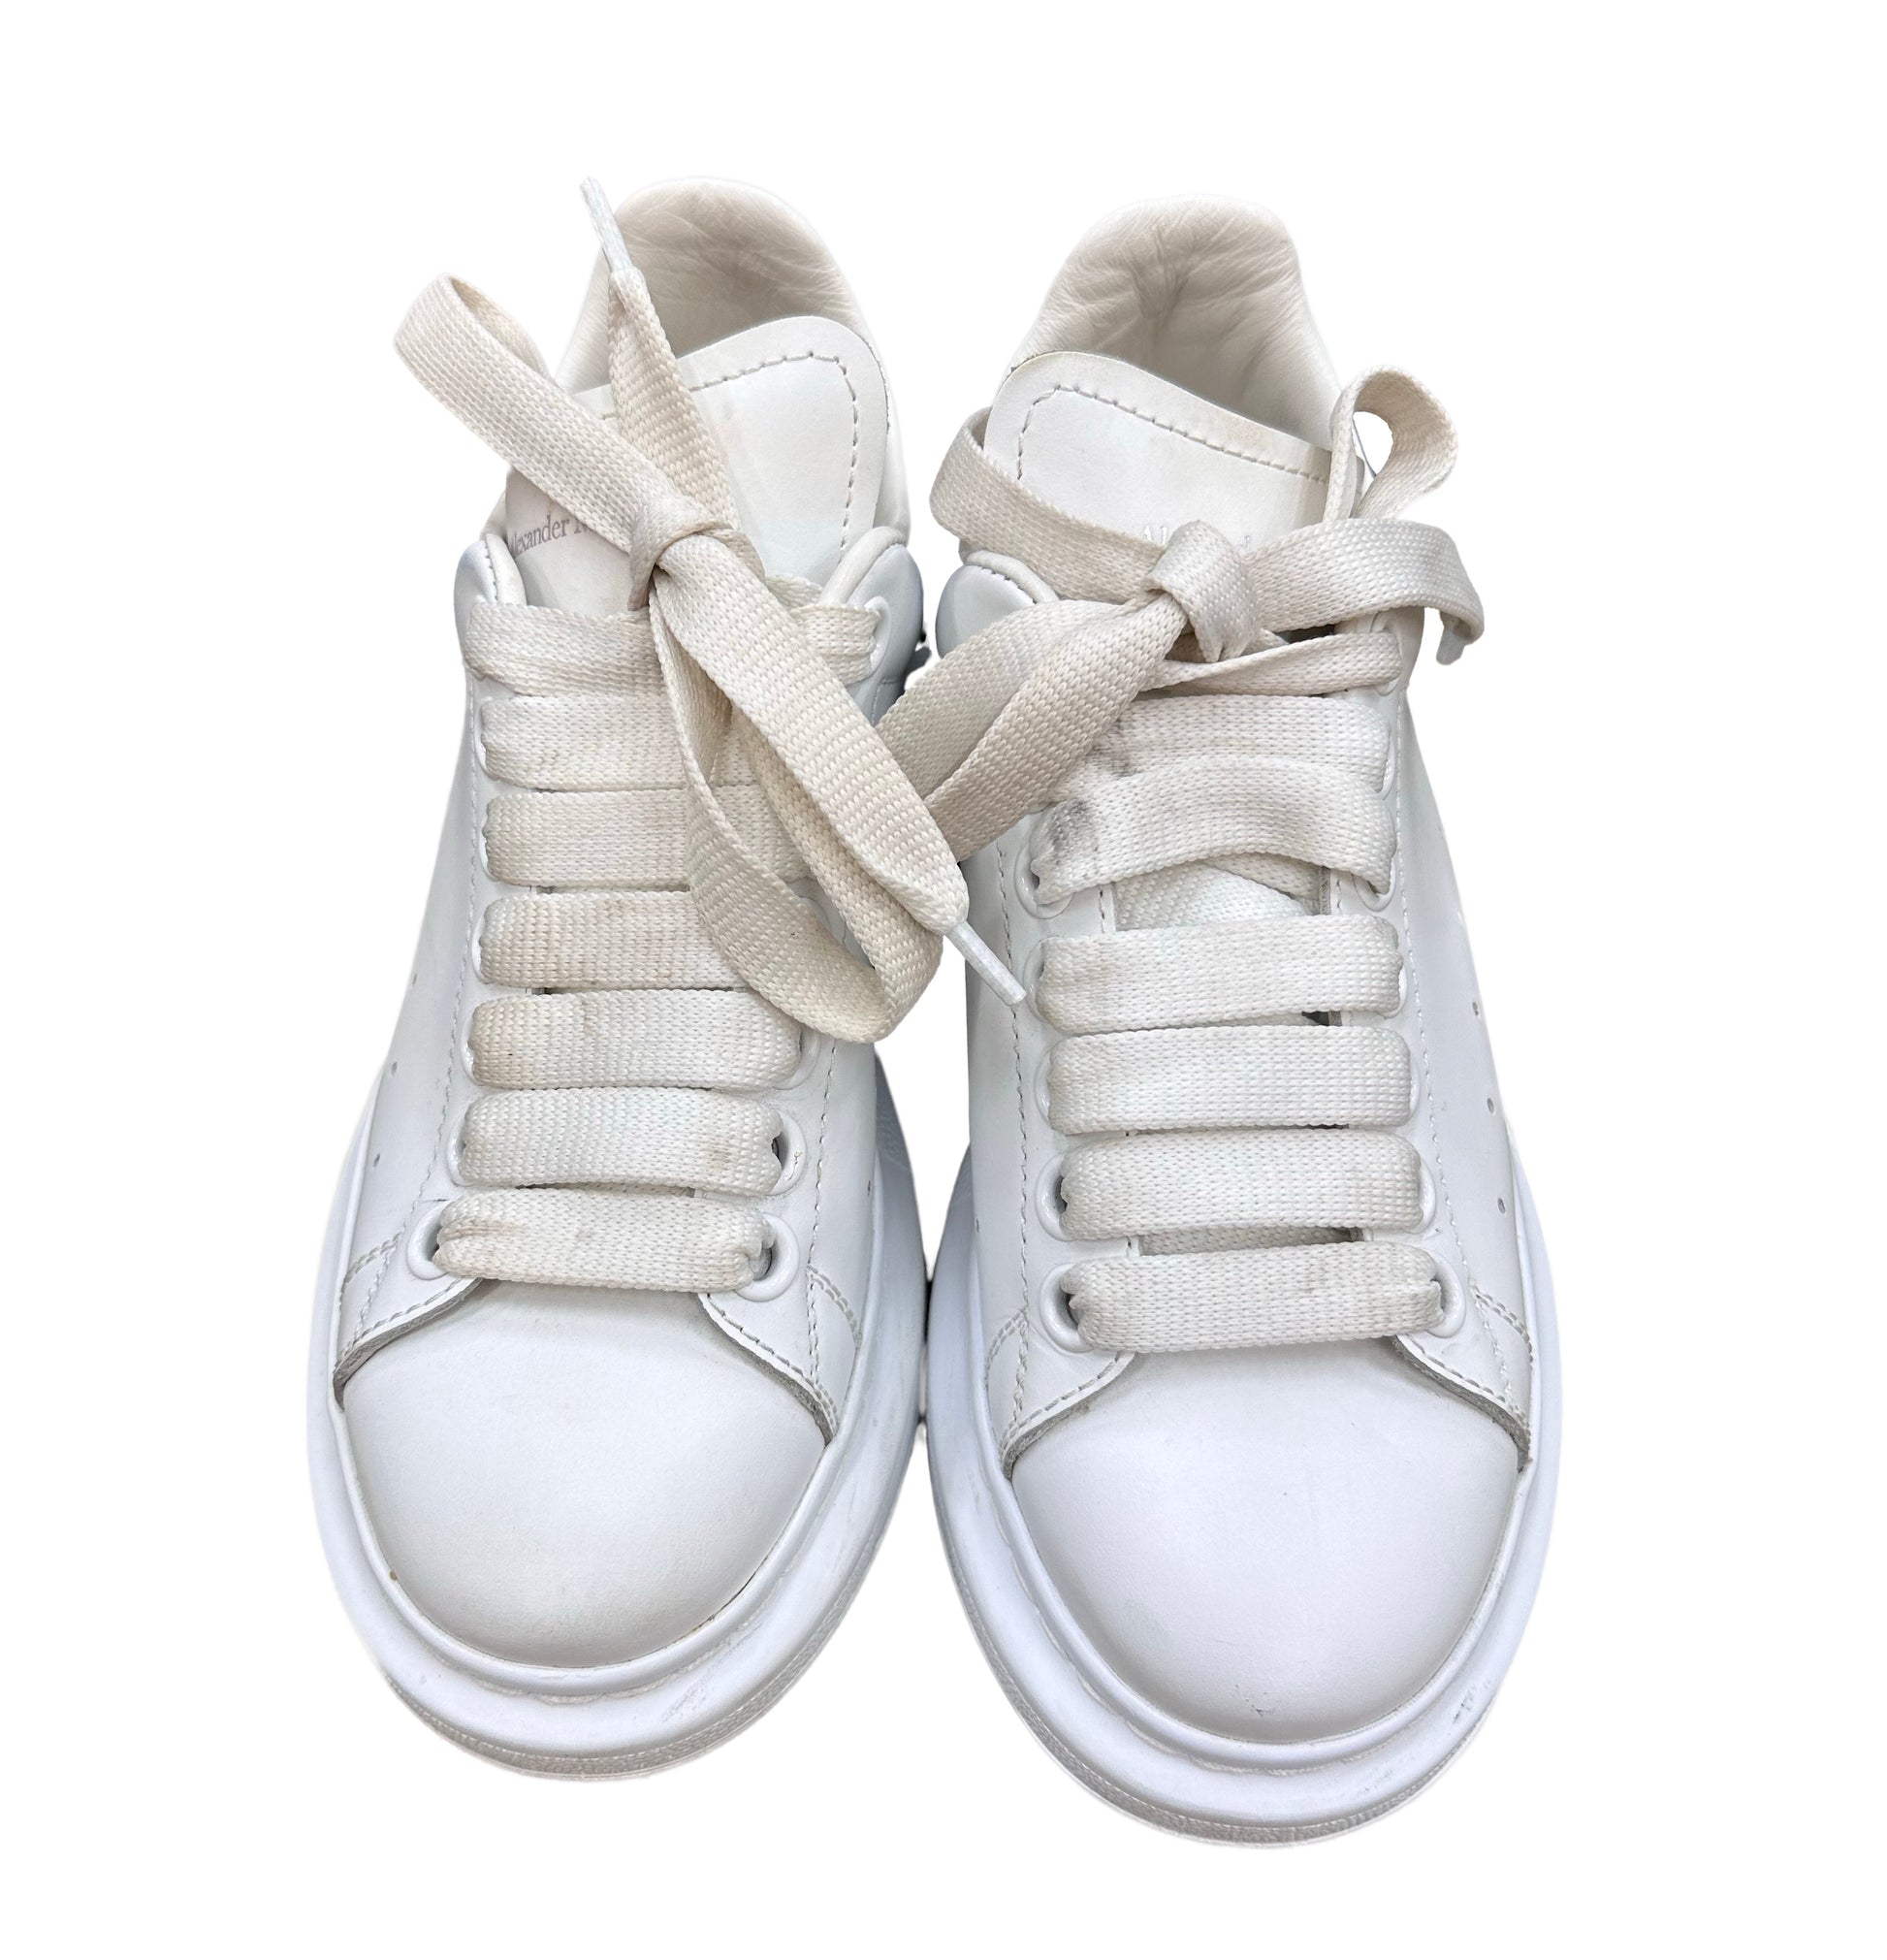 My Sister's Closet  Alexander Mcqueen Alexander McQueen Size 35.5 White  Leather Sneakers